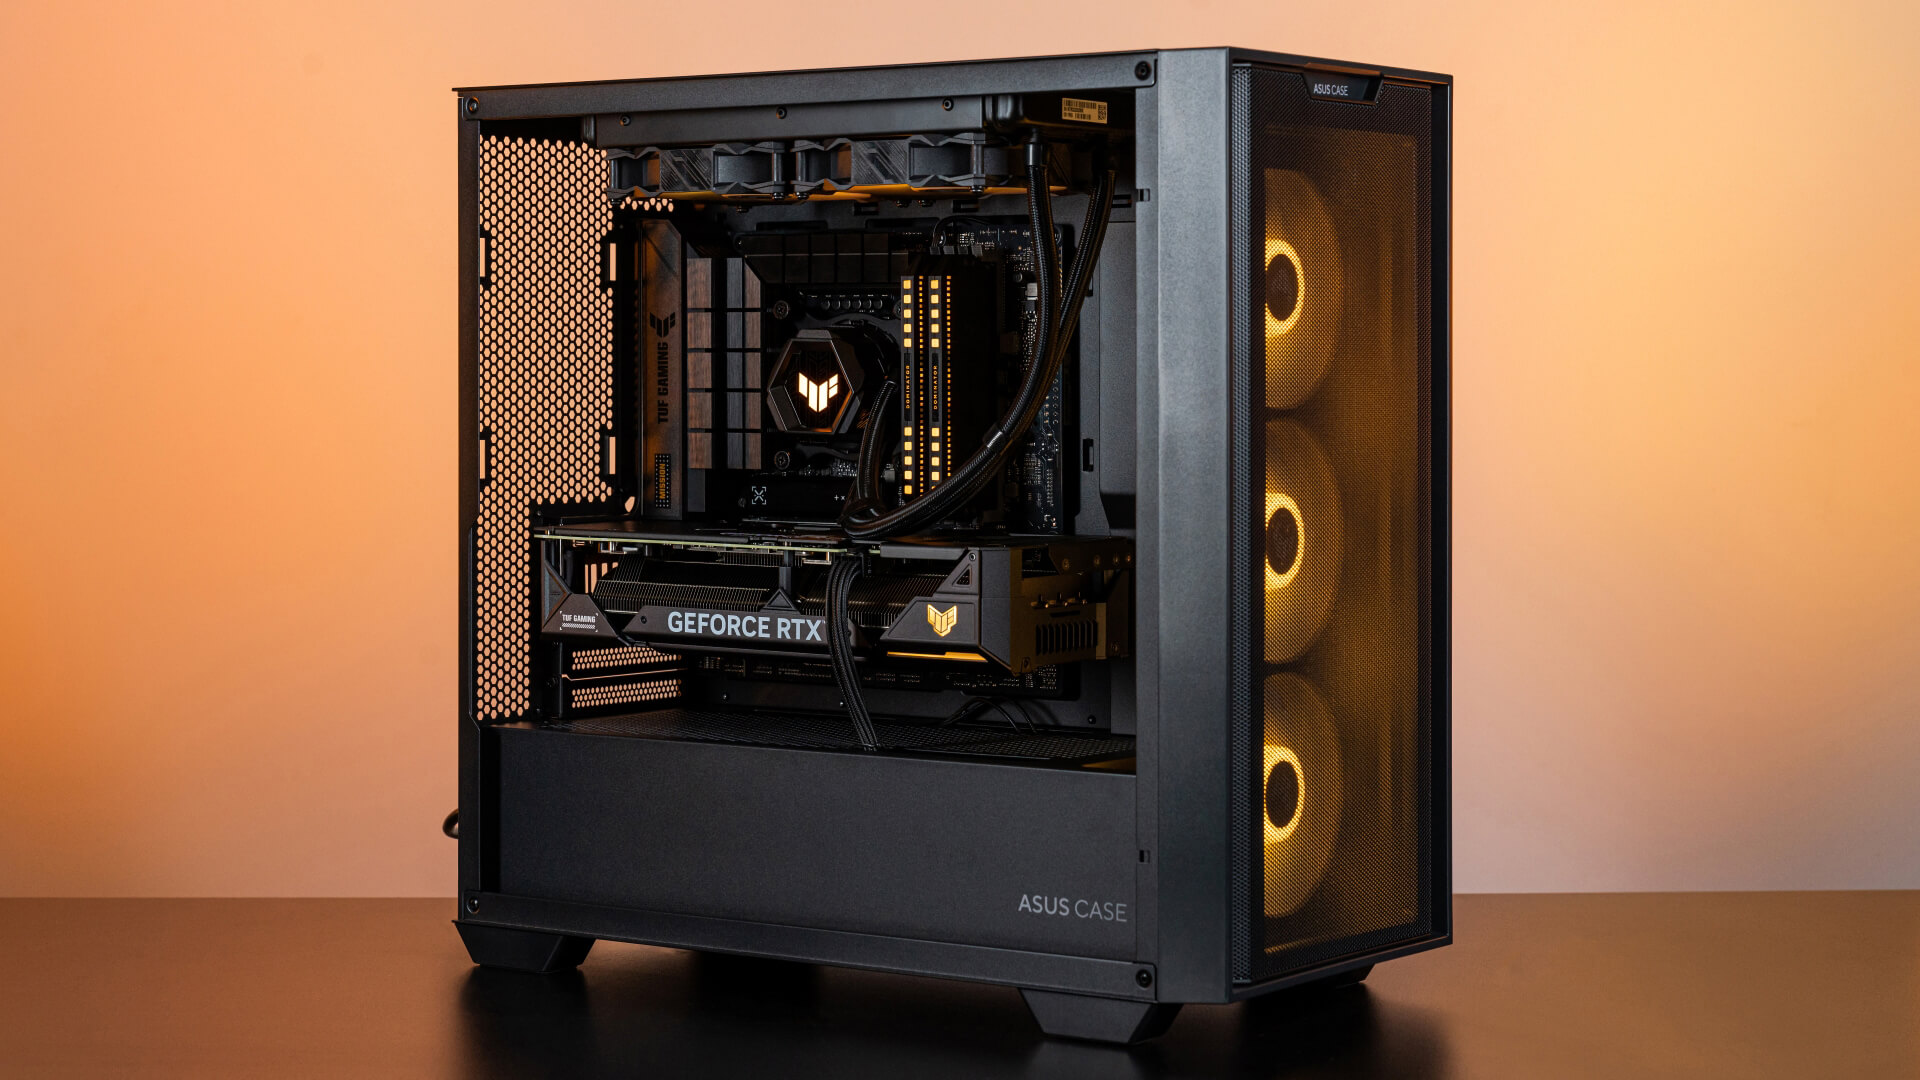 A 45˚ angle of BTF PC build with orange lighting, which shows the VGA’s power cable in the build.